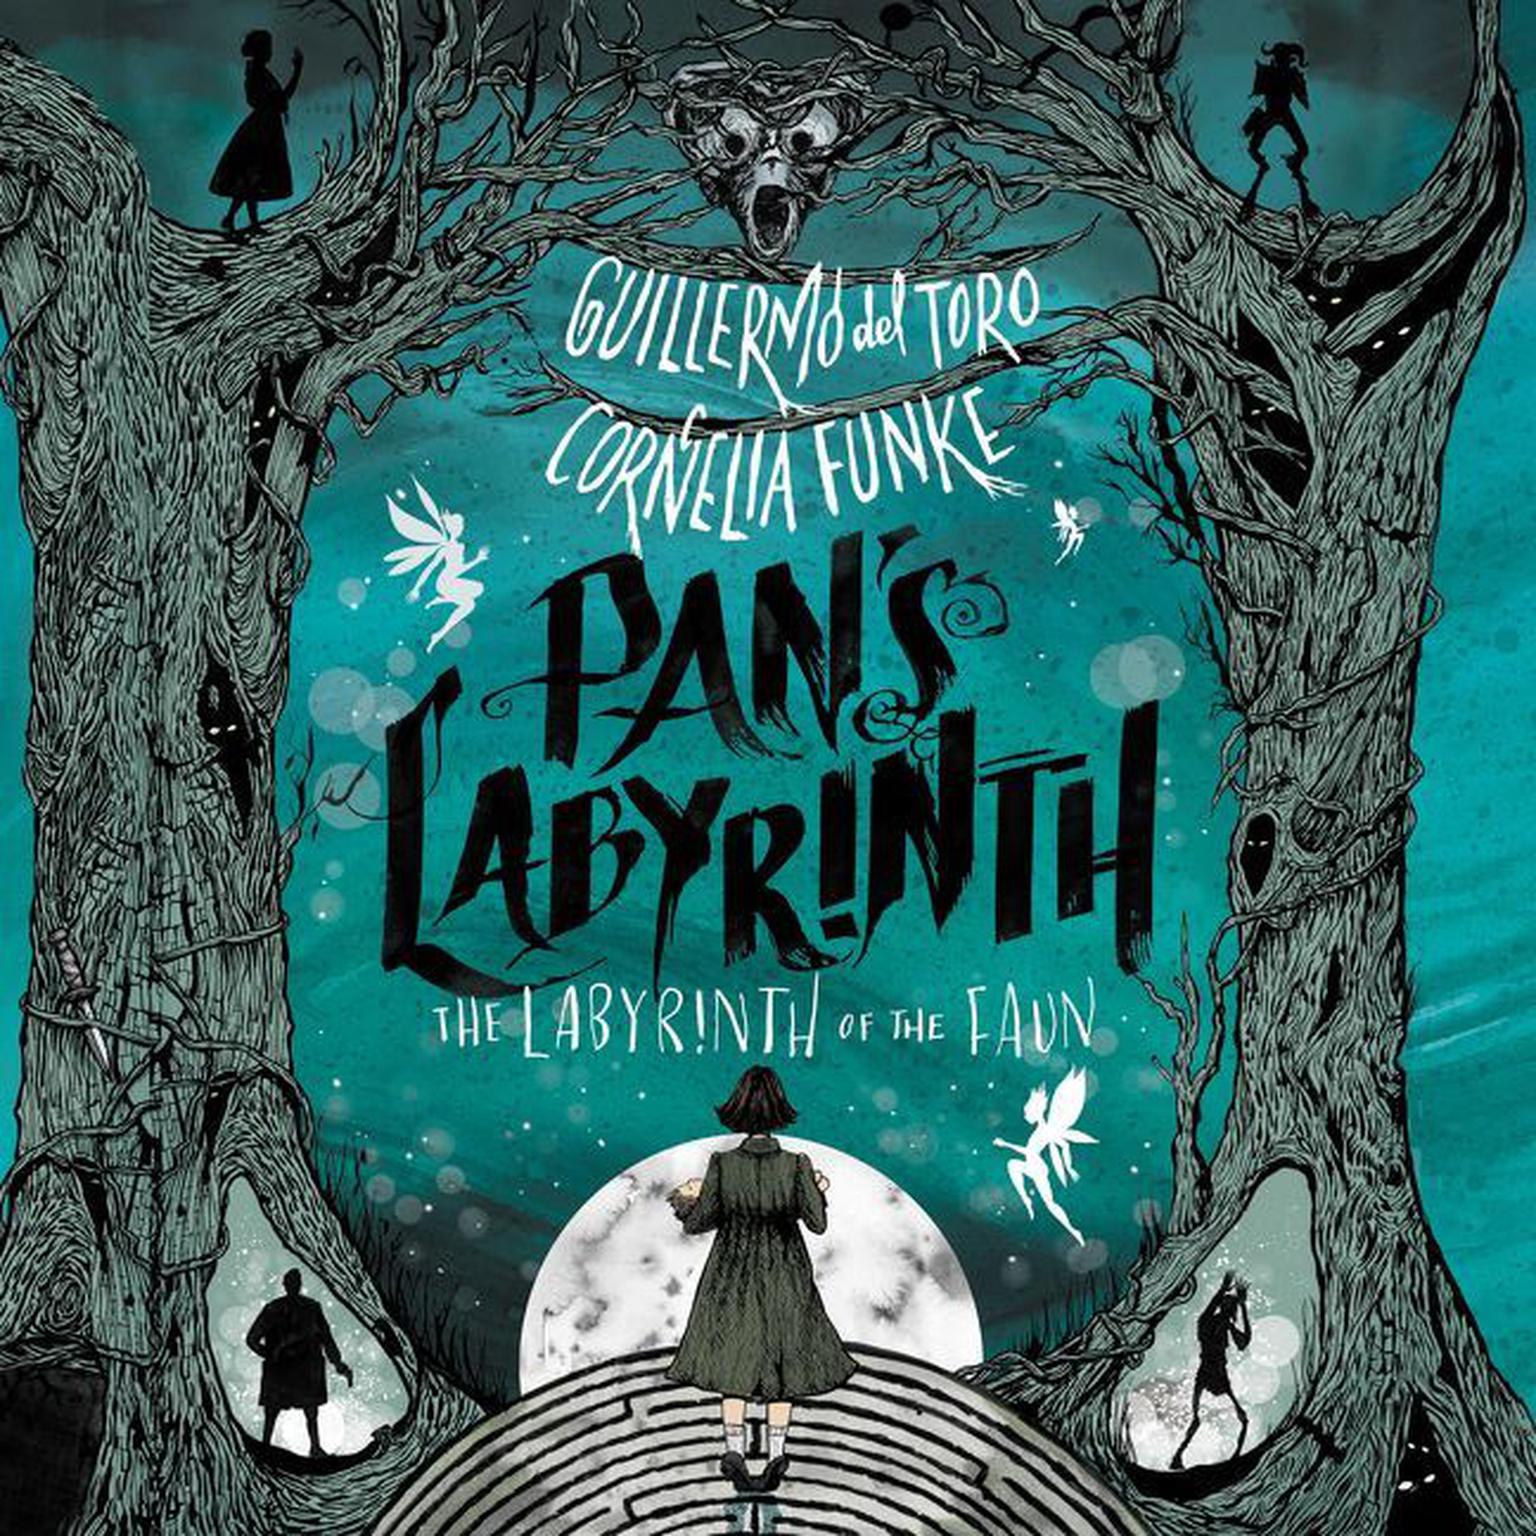 Pans Labyrinth: The Labyrinth of the Faun: The Labyrinth of the Faun Audiobook, by Guillermo del Toro